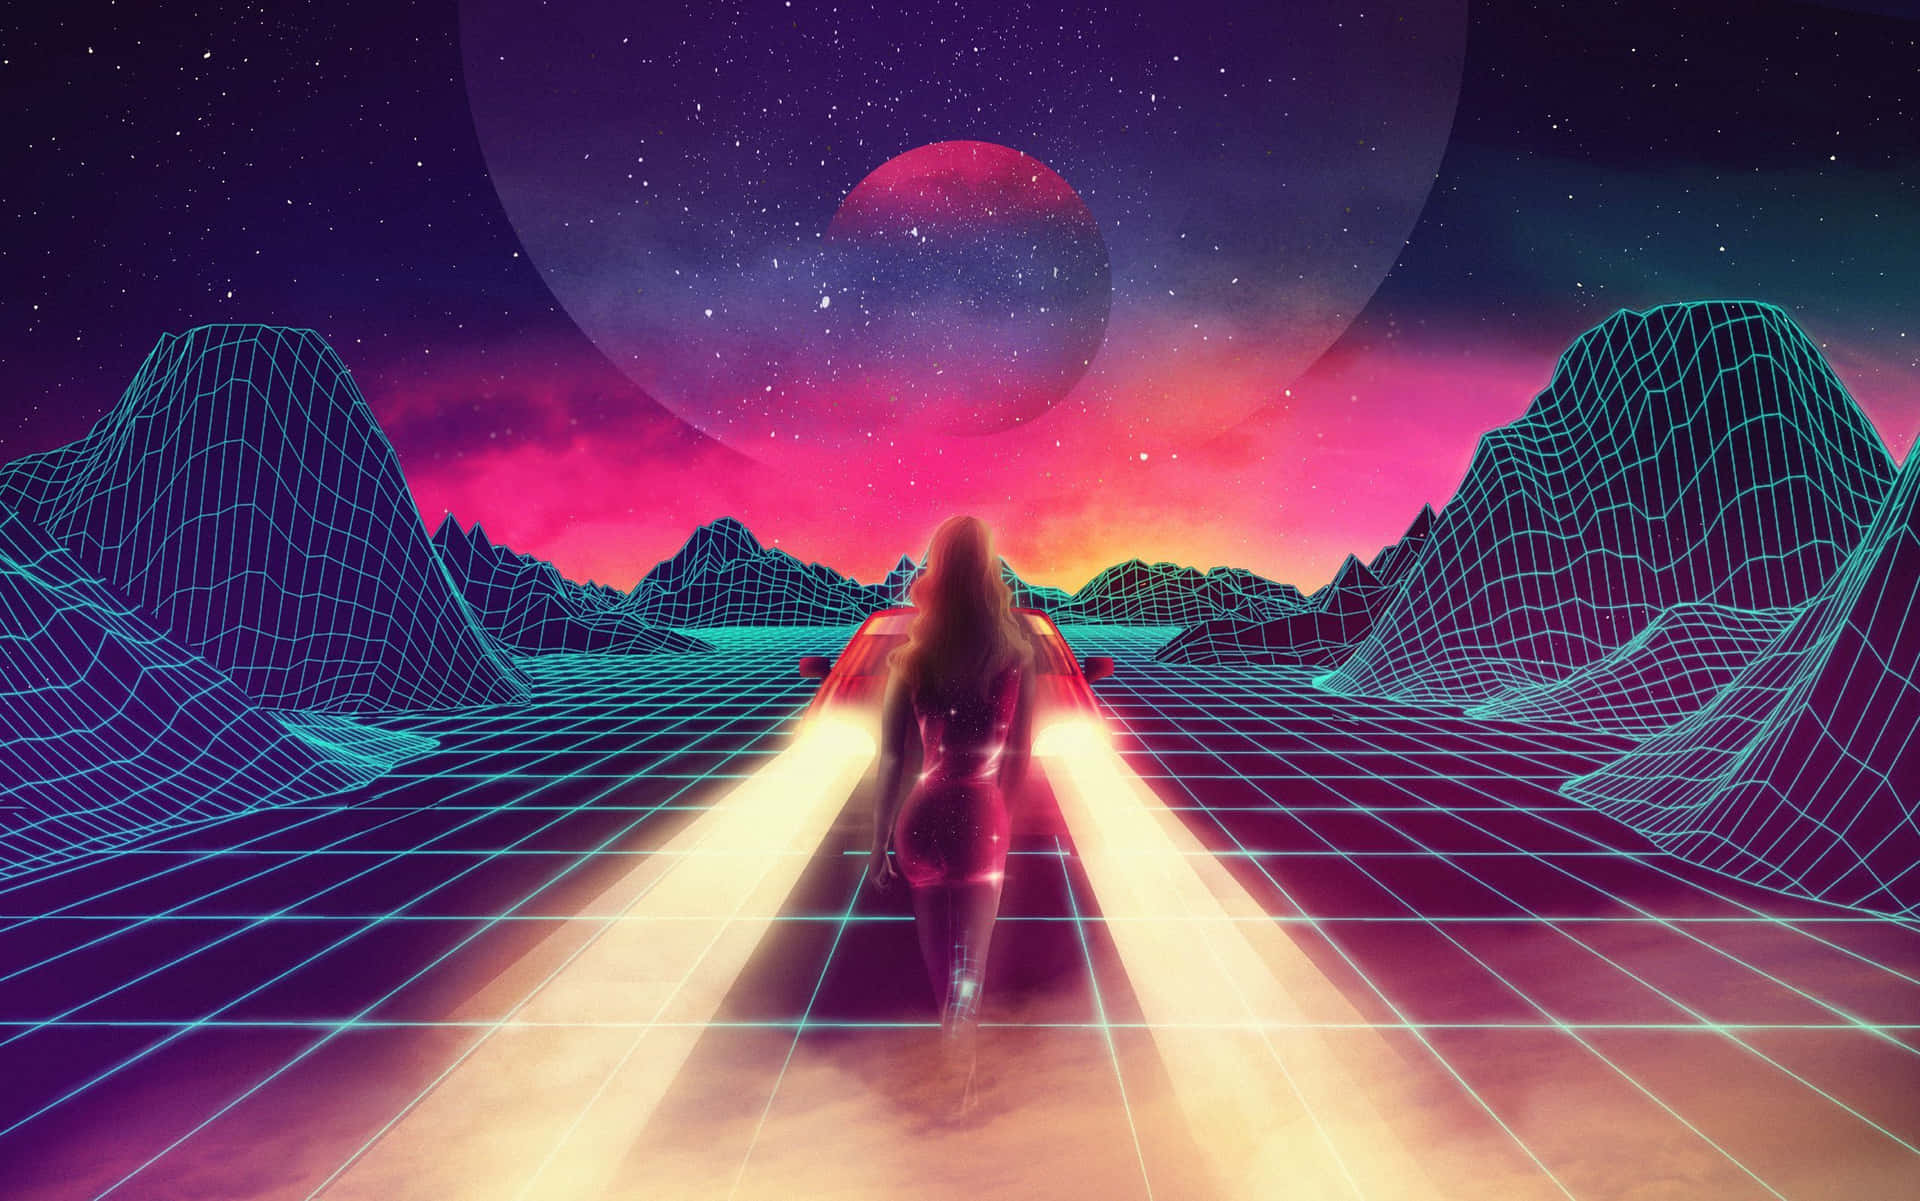 Experience the retro vibes of the 80s with this vibrant background!